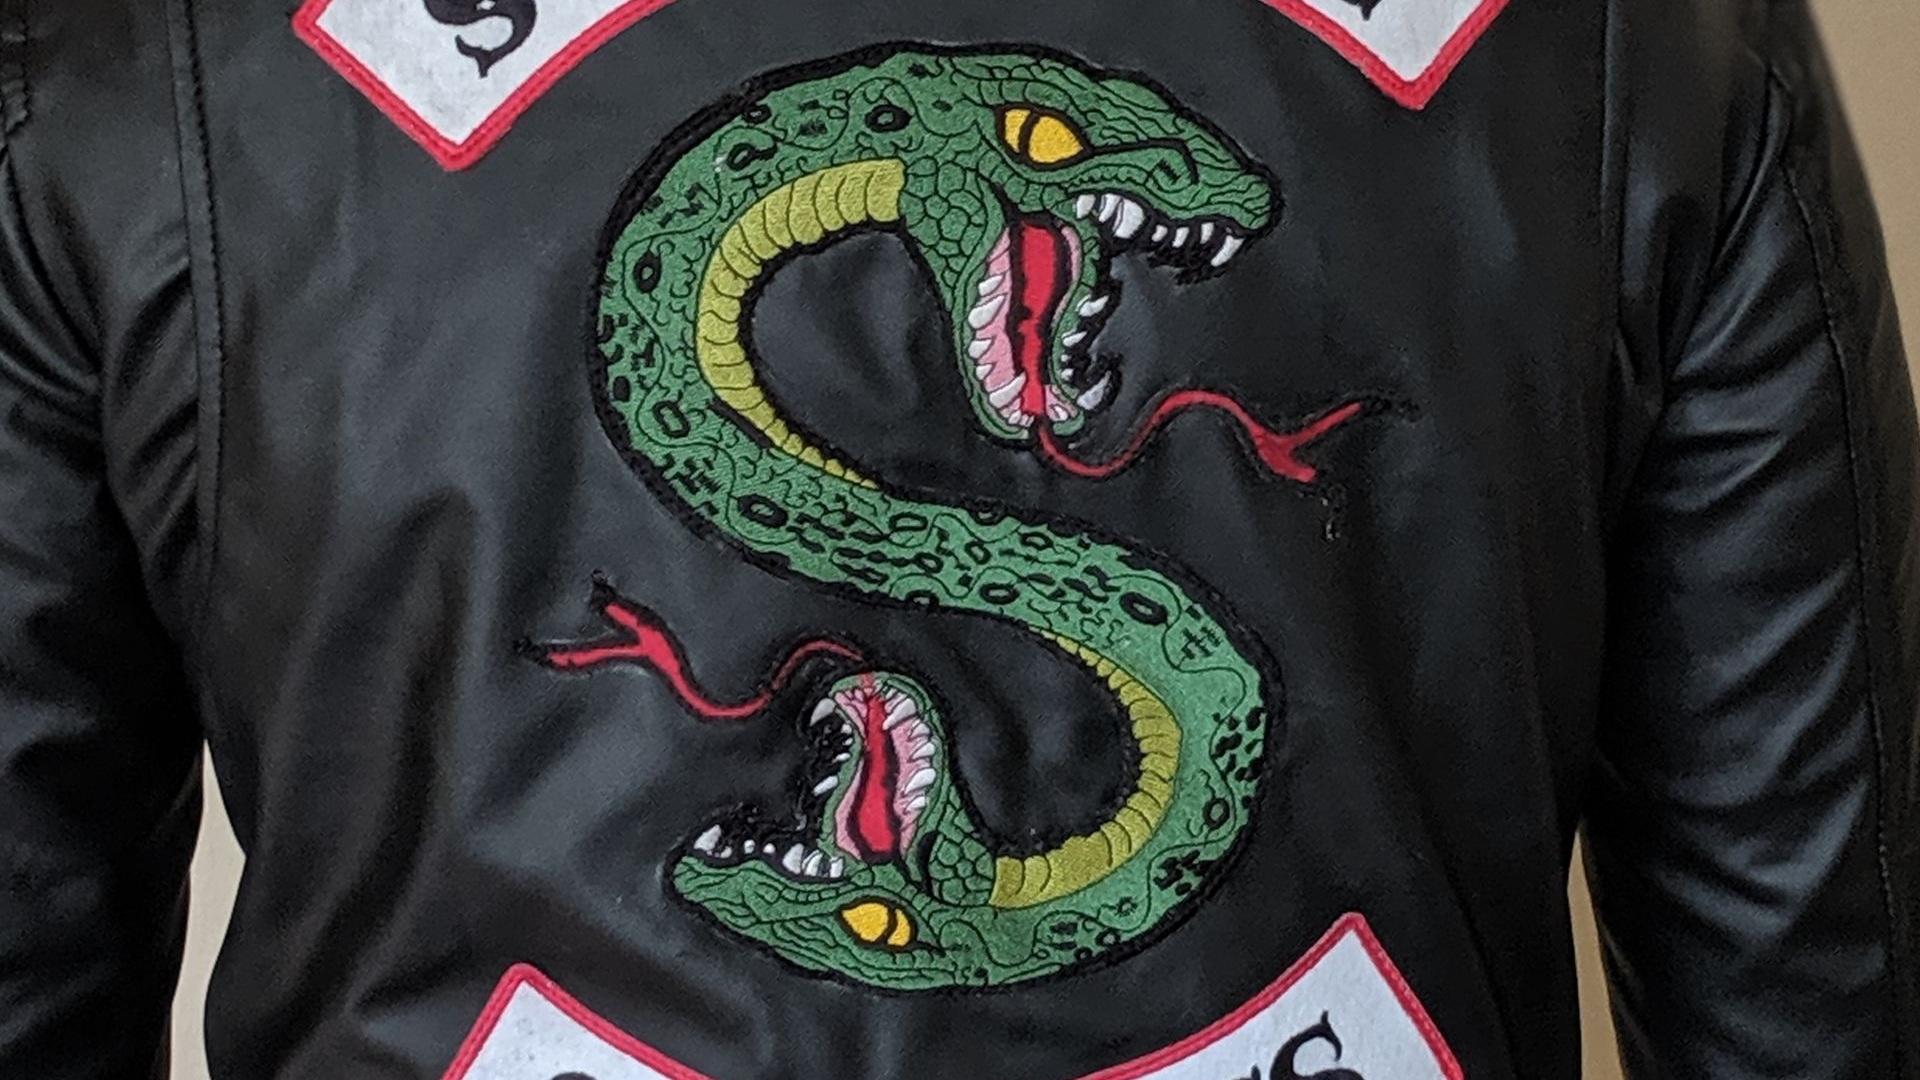 This RIVERDALE Southside Serpents Jacket is Not My Cup